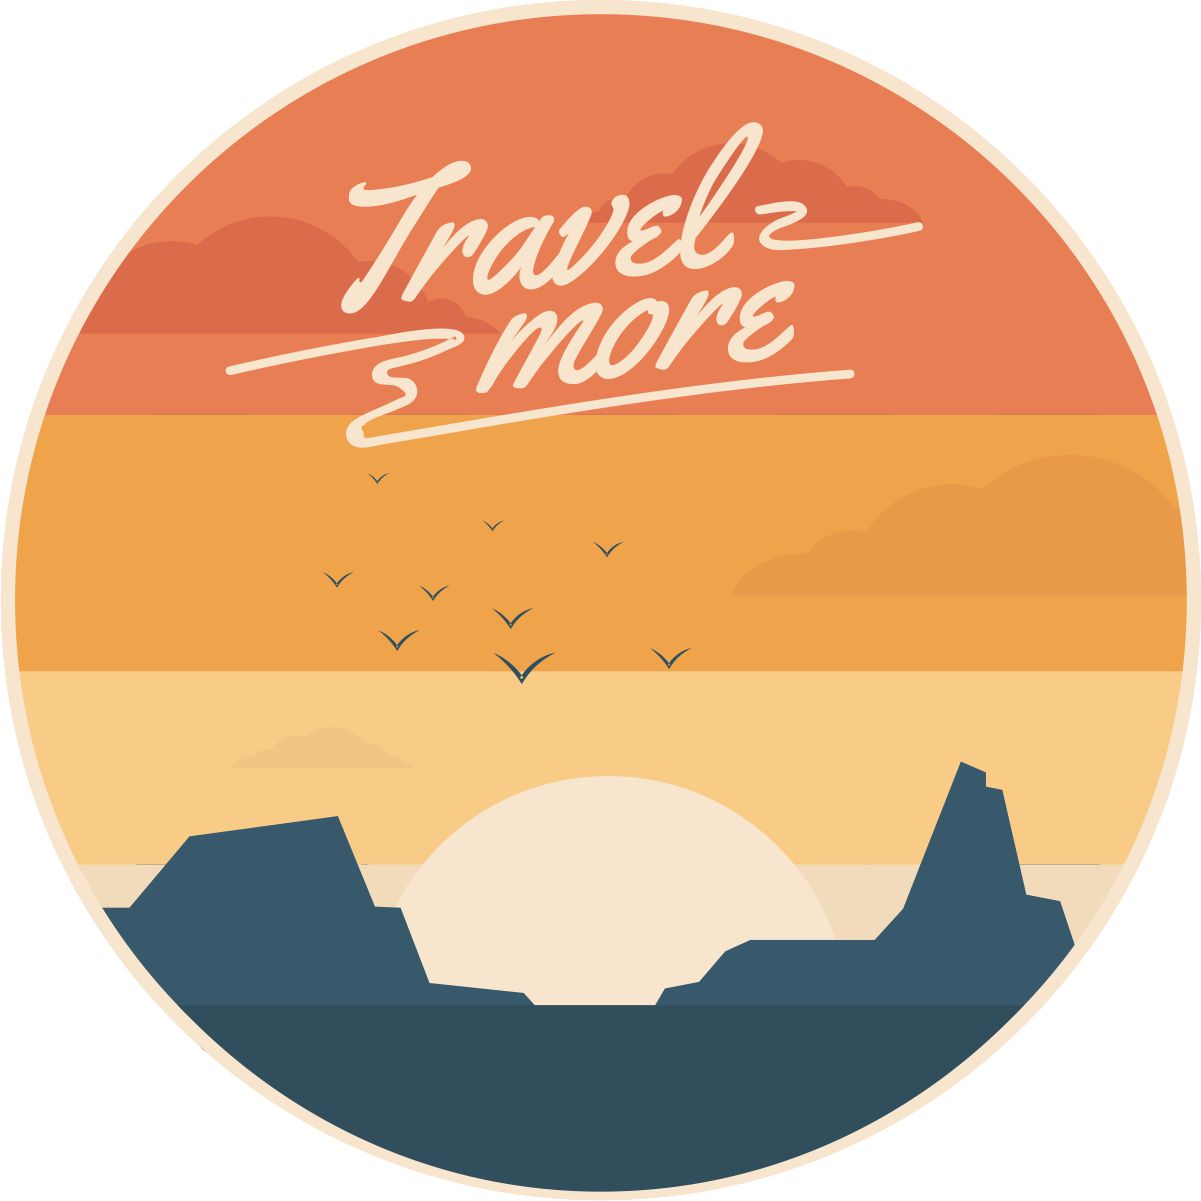 Sunset ombre style background, vintage style desert landscape spare tire cover design for vinyl spare tire cover with the words travel more.